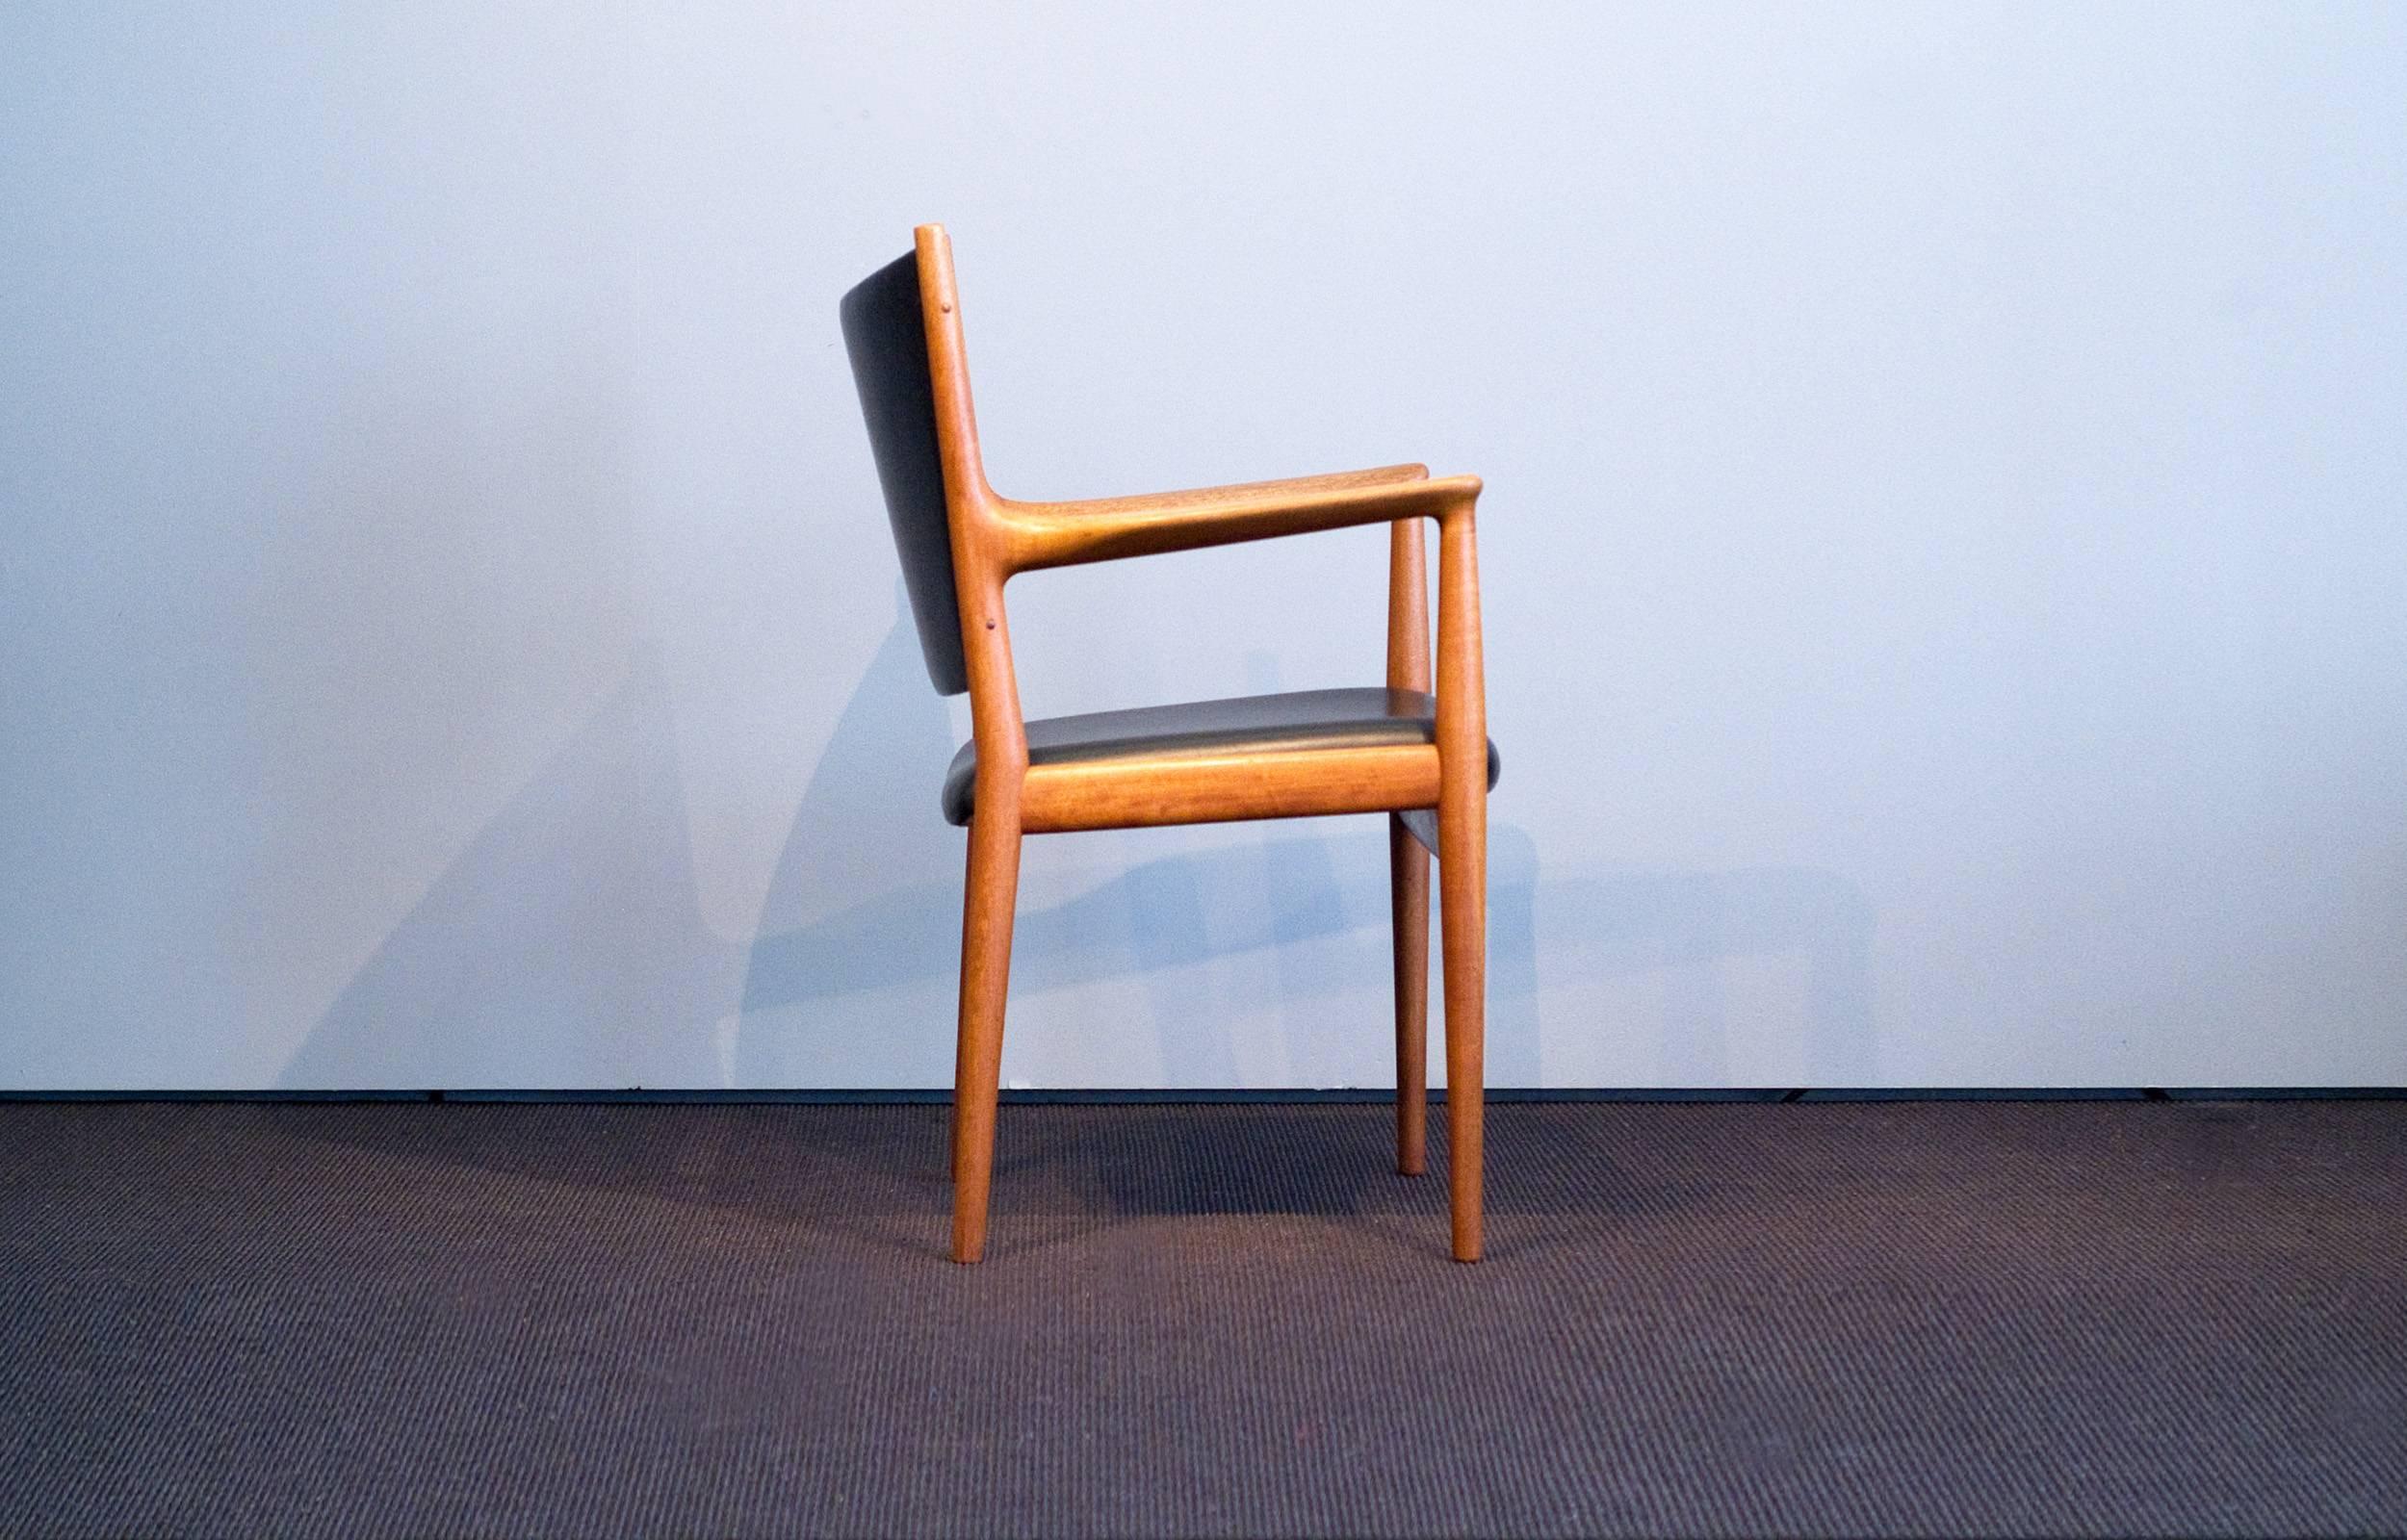 Wonderful Hans J. Wegner JH 513 Chair made by Johannes Hansen and distributed by Knoll International in the United States. Beautiful grained teak frame with original leather upholstery. 

Normal / minimal wear consistent with age and use.

 